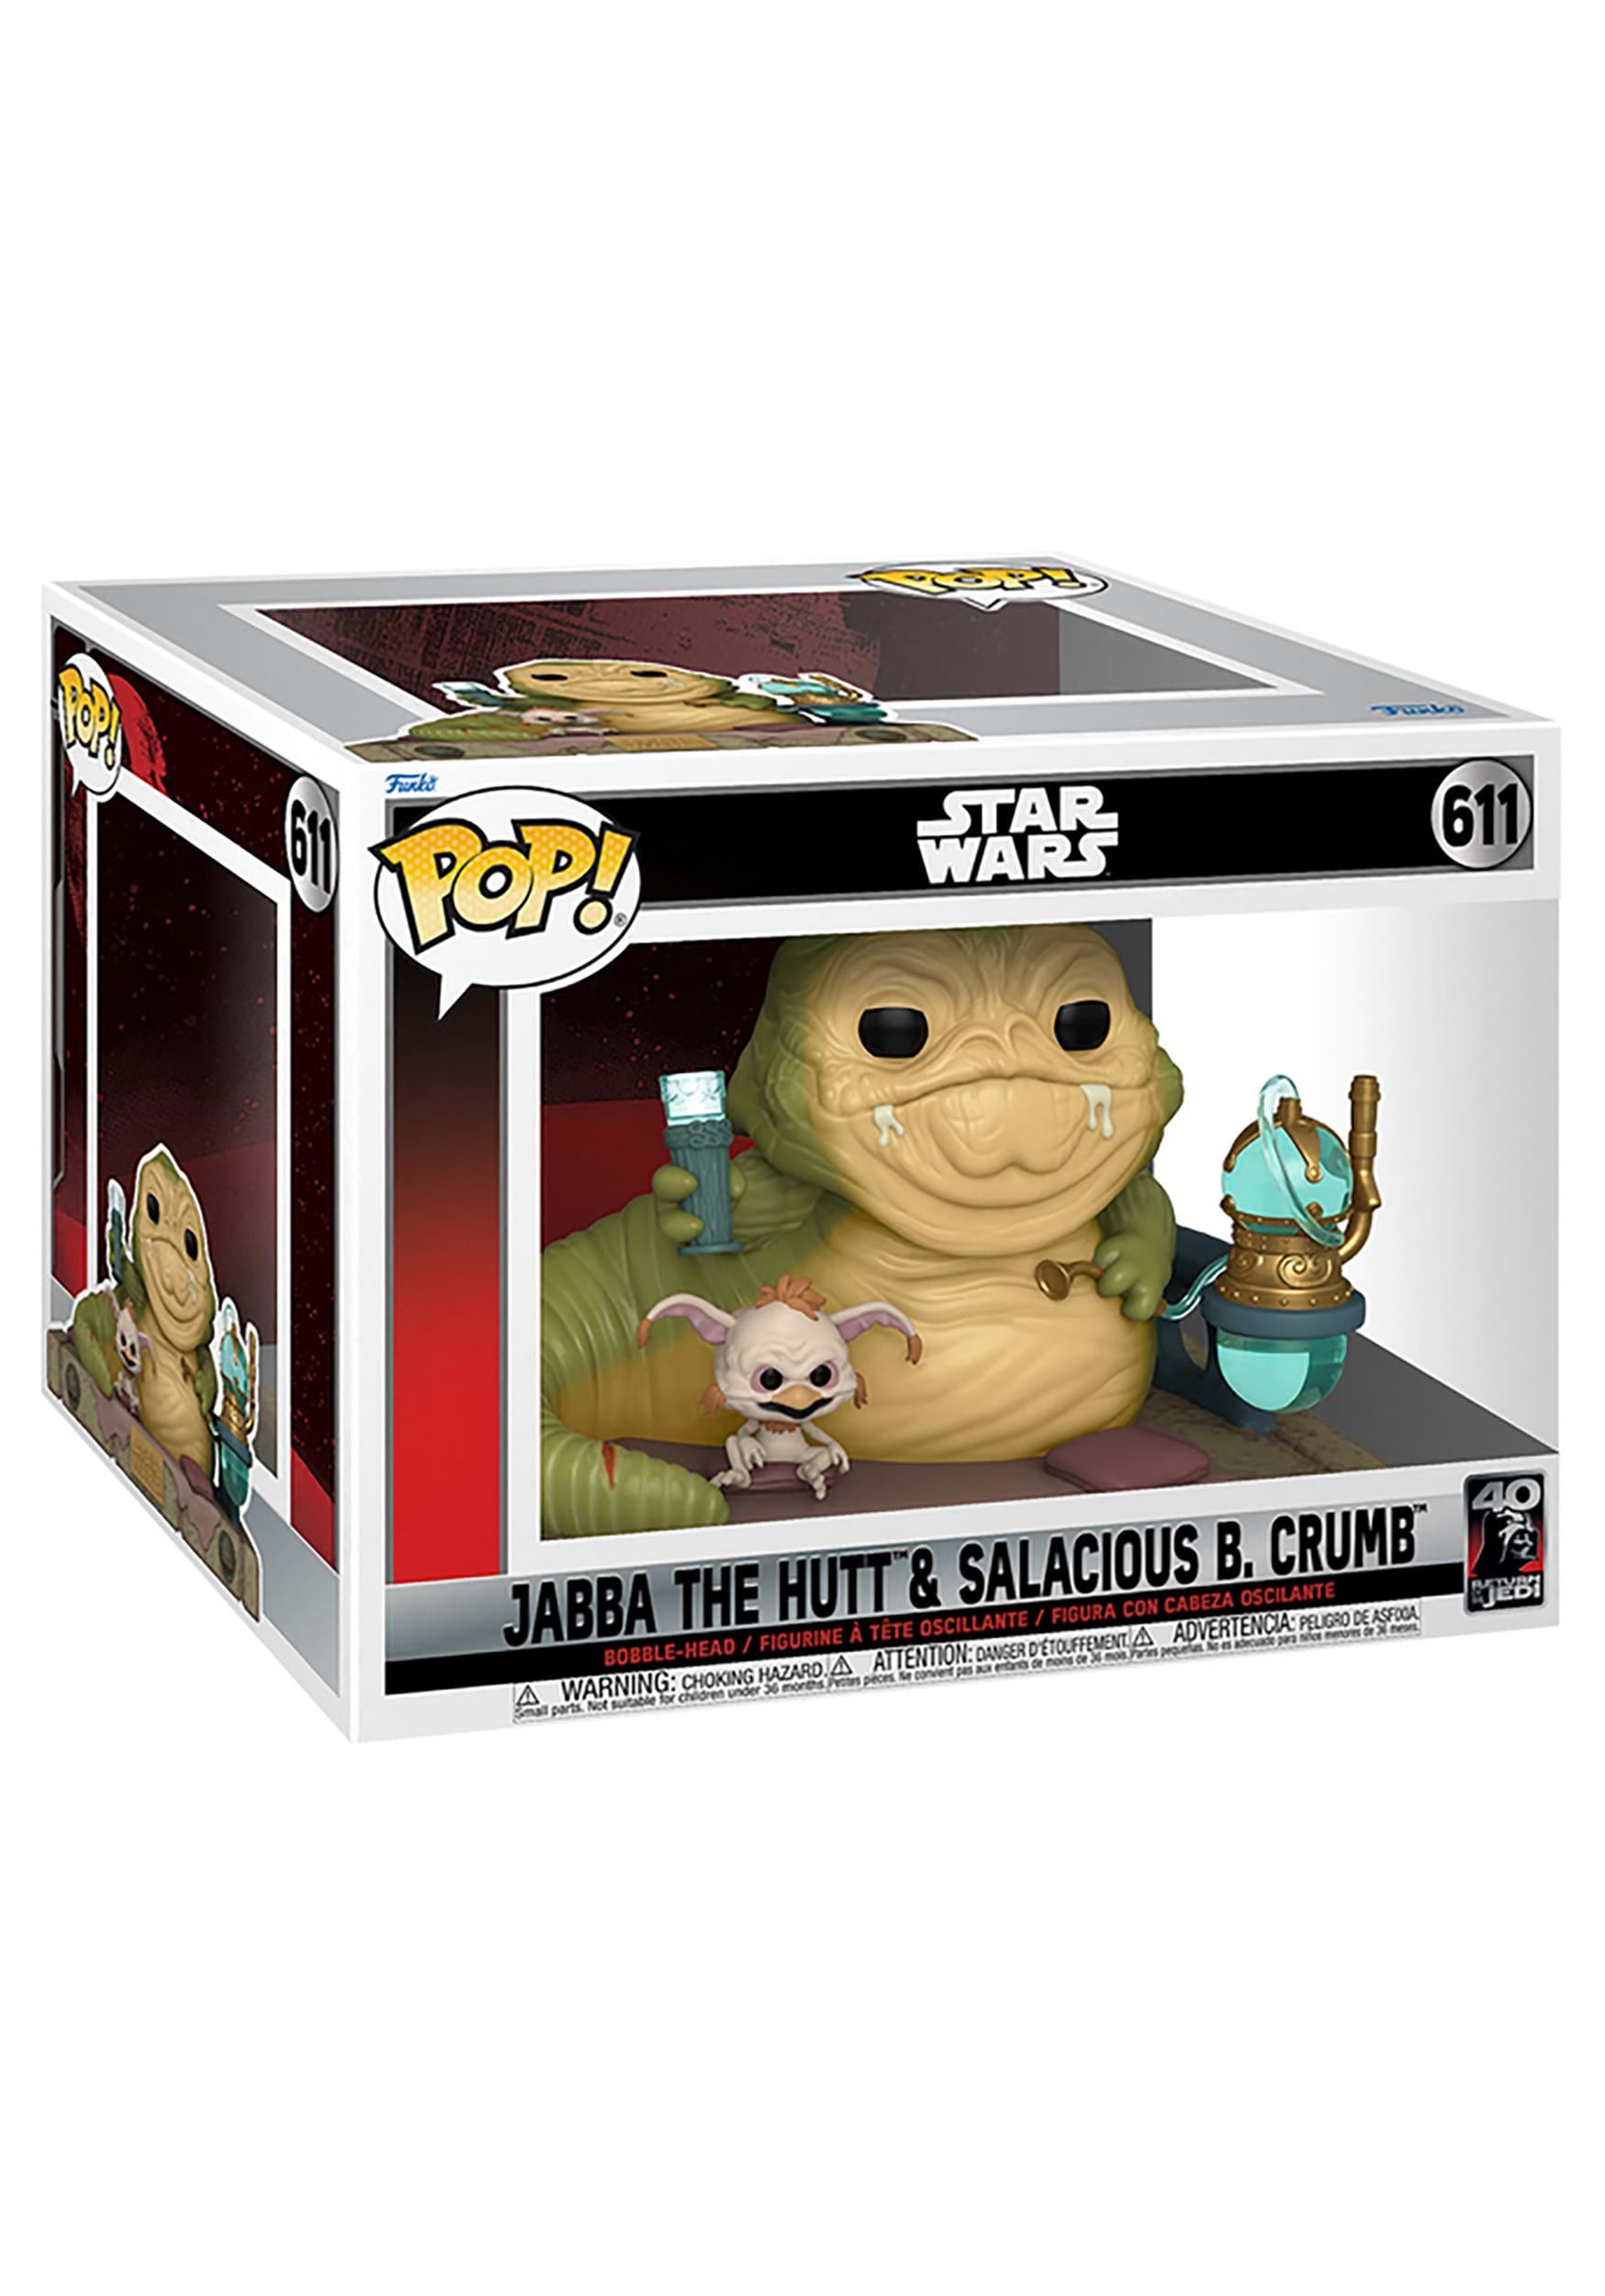 POP! Deluxe: Return of the Jedi 40th Anniversary - Jabba with Salacious